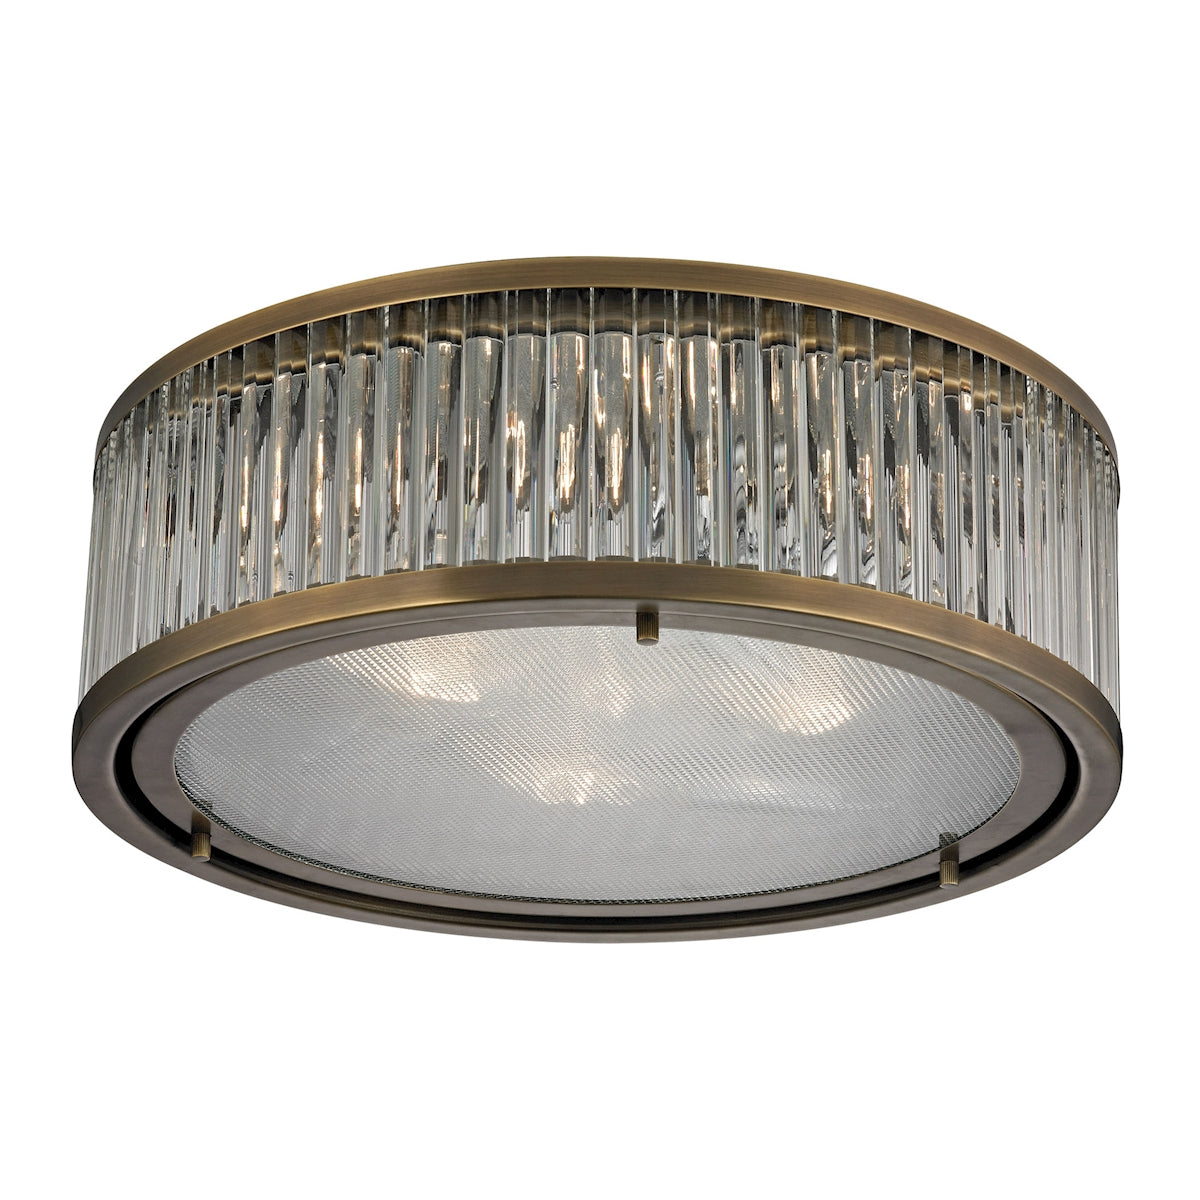 Linden Manor 3-Light Flush Mount in Aged Brass with Diffuser